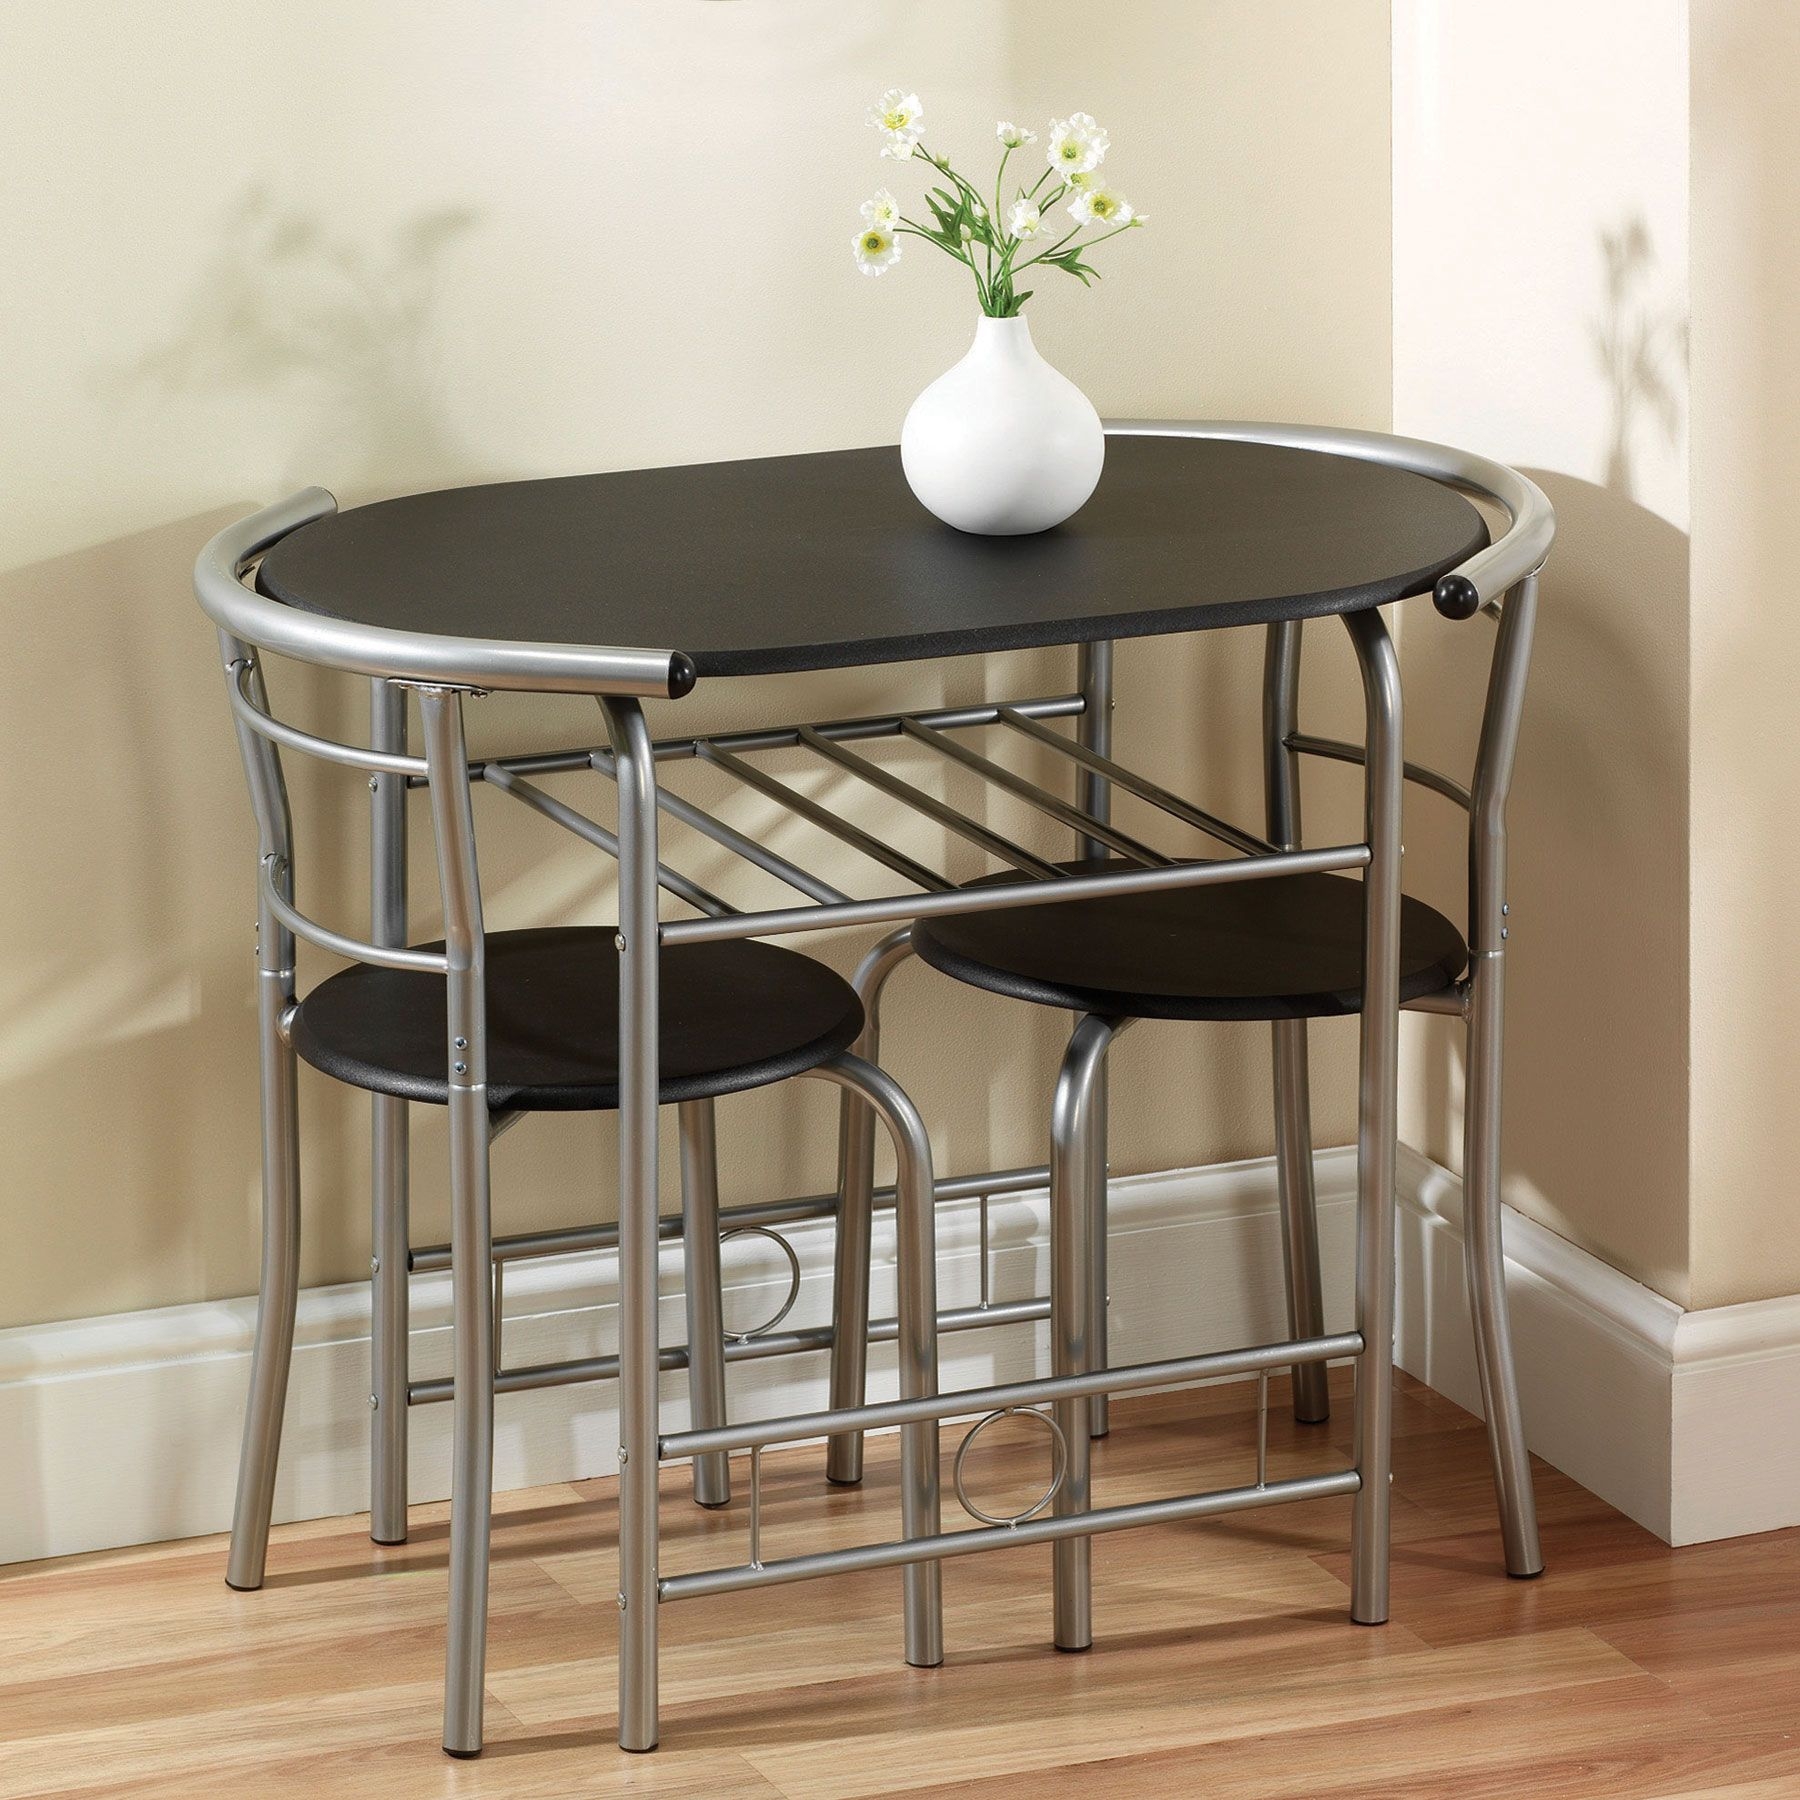 Space Saving Table And Chairs Visualhunt, Dining Room Set For Small Spaces